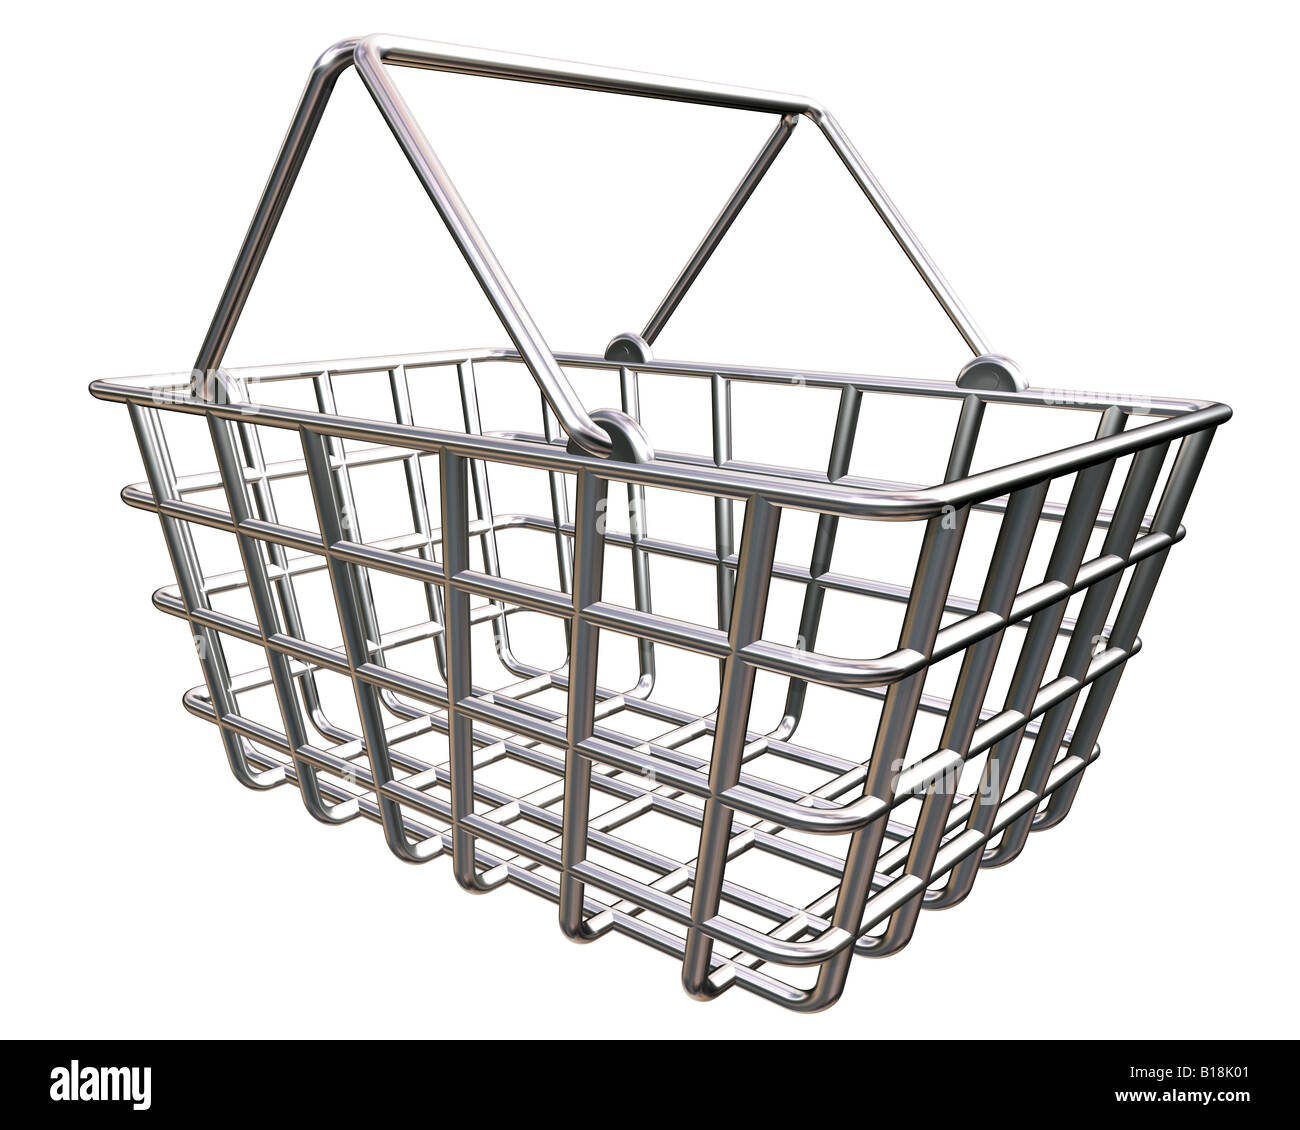 Stylized shopping basket representing the buying of goods online Stock Photo